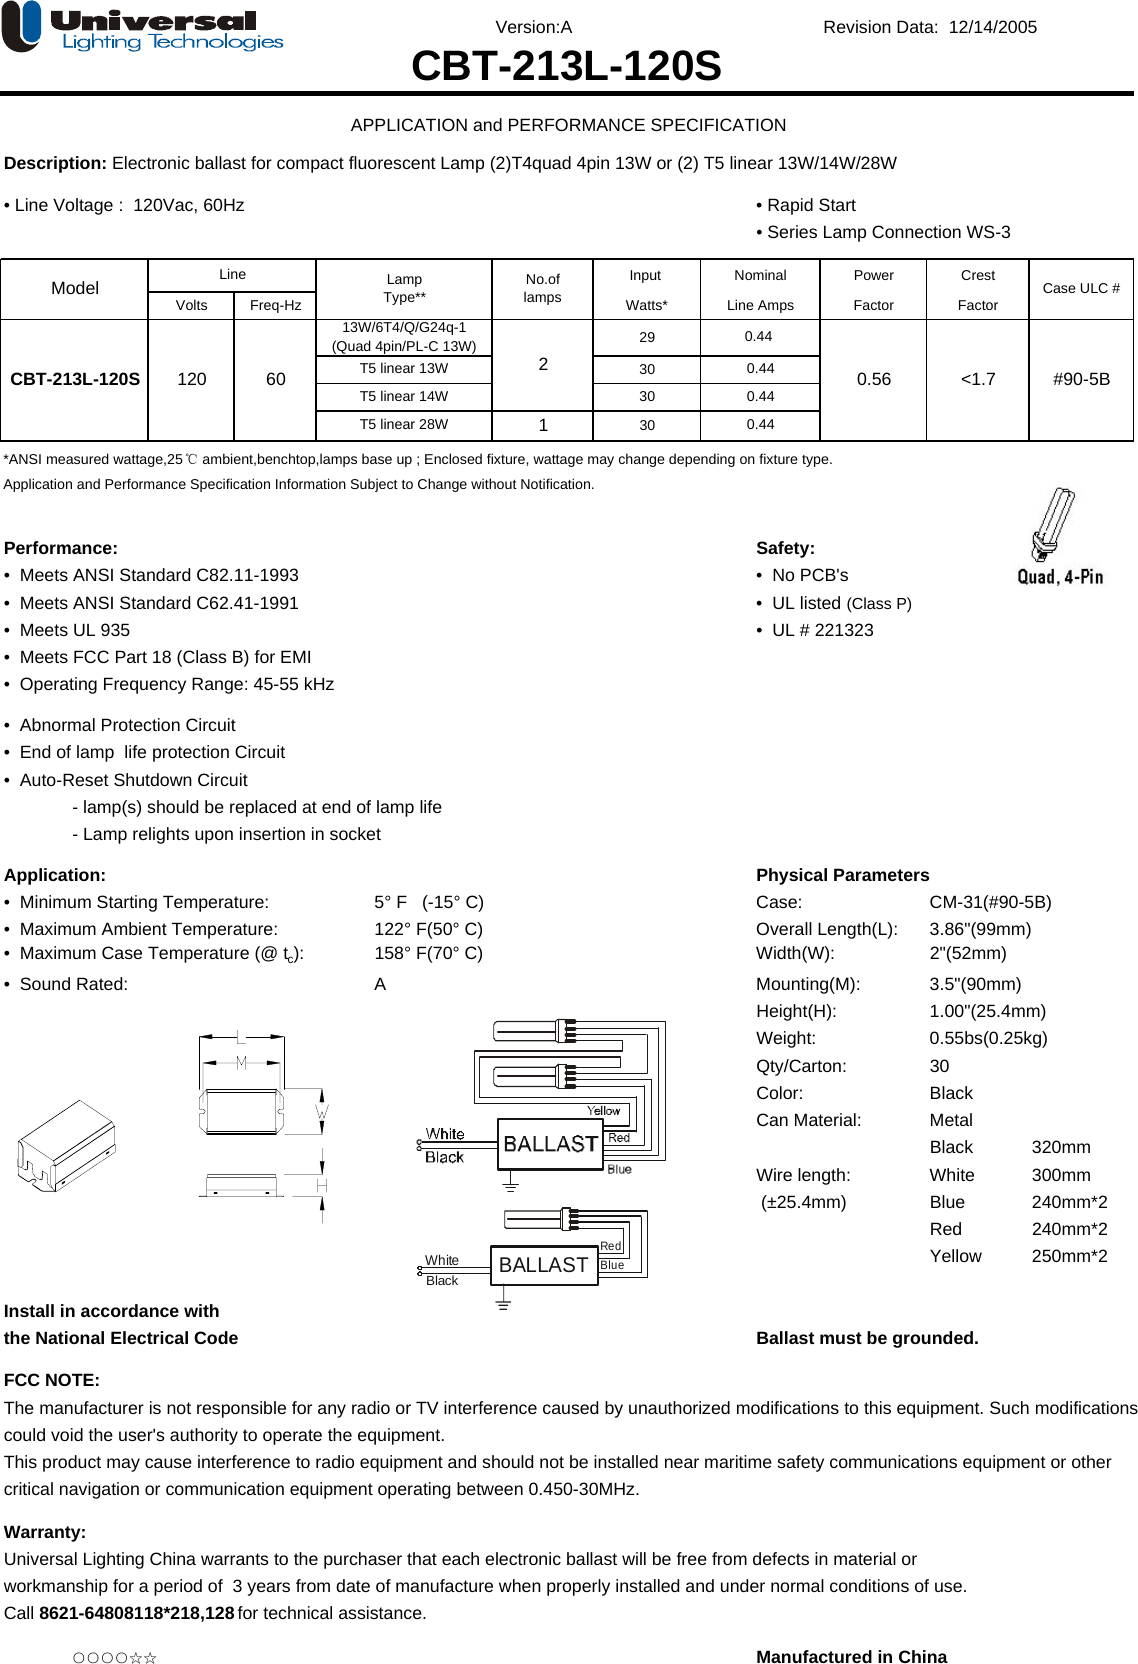 Version:A Revision Data:  12/14/2005Description: Electronic ballast for compact fluorescent Lamp (2)T4quad 4pin 13W or (2) T5 linear 13W/14W/28W• Line Voltage :  120Vac, 60Hz • Rapid Start• Series Lamp Connection WS-3Input Power CrestVolts Freq-Hz Watts* Factor Factor293030130*ANSI measured wattage,25℃ ambient,benchtop,lamps base up ; Enclosed fixture, wattage may change depending on fixture type.Application and Performance Specification Information Subject to Change without Notification.Performance: Safety:•  Meets ANSI Standard C82.11-1993 •  No PCB&apos;s•  Meets ANSI Standard C62.41-1991 •  UL listed (Class P)•  Meets UL 935   •  UL # 221323•  Meets FCC Part 18 (Class B) for EMI•  Operating Frequency Range: 45-55 kHz•  Abnormal Protection Circuit •  End of lamp  life protection Circuit •  Auto-Reset Shutdown Circuit - lamp(s) should be replaced at end of lamp life- Lamp relights upon insertion in socketApplication: Physical Parameters•  Minimum Starting Temperature:  5° F   (-15° C) Case:  CM-31(#90-5B)•  Maximum Ambient Temperature: 122° F(50° C) Overall Length(L): 3.86&quot;(99mm)•  Maximum Case Temperature (@ tc): 158° F(70° C) Width(W): 2&quot;(52mm)•  Sound Rated: A Mounting(M): 3.5&quot;(90mm)Height(H): 1.00&quot;(25.4mm)Weight: 0.55bs(0.25kg)Qty/Carton: 30Color: BlackCan Material: MetalBlack 320mmWire length: White 300mm (±25.4mm) Blue   240mm*2Red    240mm*2Yellow 250mm*2Install in accordance withthe National Electrical Code Ballast must be grounded.FCC NOTE:The manufacturer is not responsible for any radio or TV interference caused by unauthorized modifications to this equipment. Such modificationscould void the user&apos;s authority to operate the equipment.This product may cause interference to radio equipment and should not be installed near maritime safety communications equipment or othercritical navigation or communication equipment operating between 0.450-30MHz.Warranty:Universal Lighting China warrants to the purchaser that each electronic ballast will be free from defects in material orworkmanship for a period of  3 years from date of manufacture when properly installed and under normal conditions of use. Call 8621-64808118*218,128 for technical assistance.○○○○☆☆ Manufactured in China0.44CBT-213L-120S 120 60 T5 linear 13W &lt;1.7 #90-5BT5 linear 14WT5 linear 28W0.440.440.44213W/6T4/Q/G24q-1(Quad 4pin/PL-C 13W)0.56CBT-213L-120SAPPLICATION and PERFORMANCE SPECIFICATIONLine Case ULC #No.oflampsModel LampType** Line AmpsNominalBALLASTRedBlueWhiteBlack